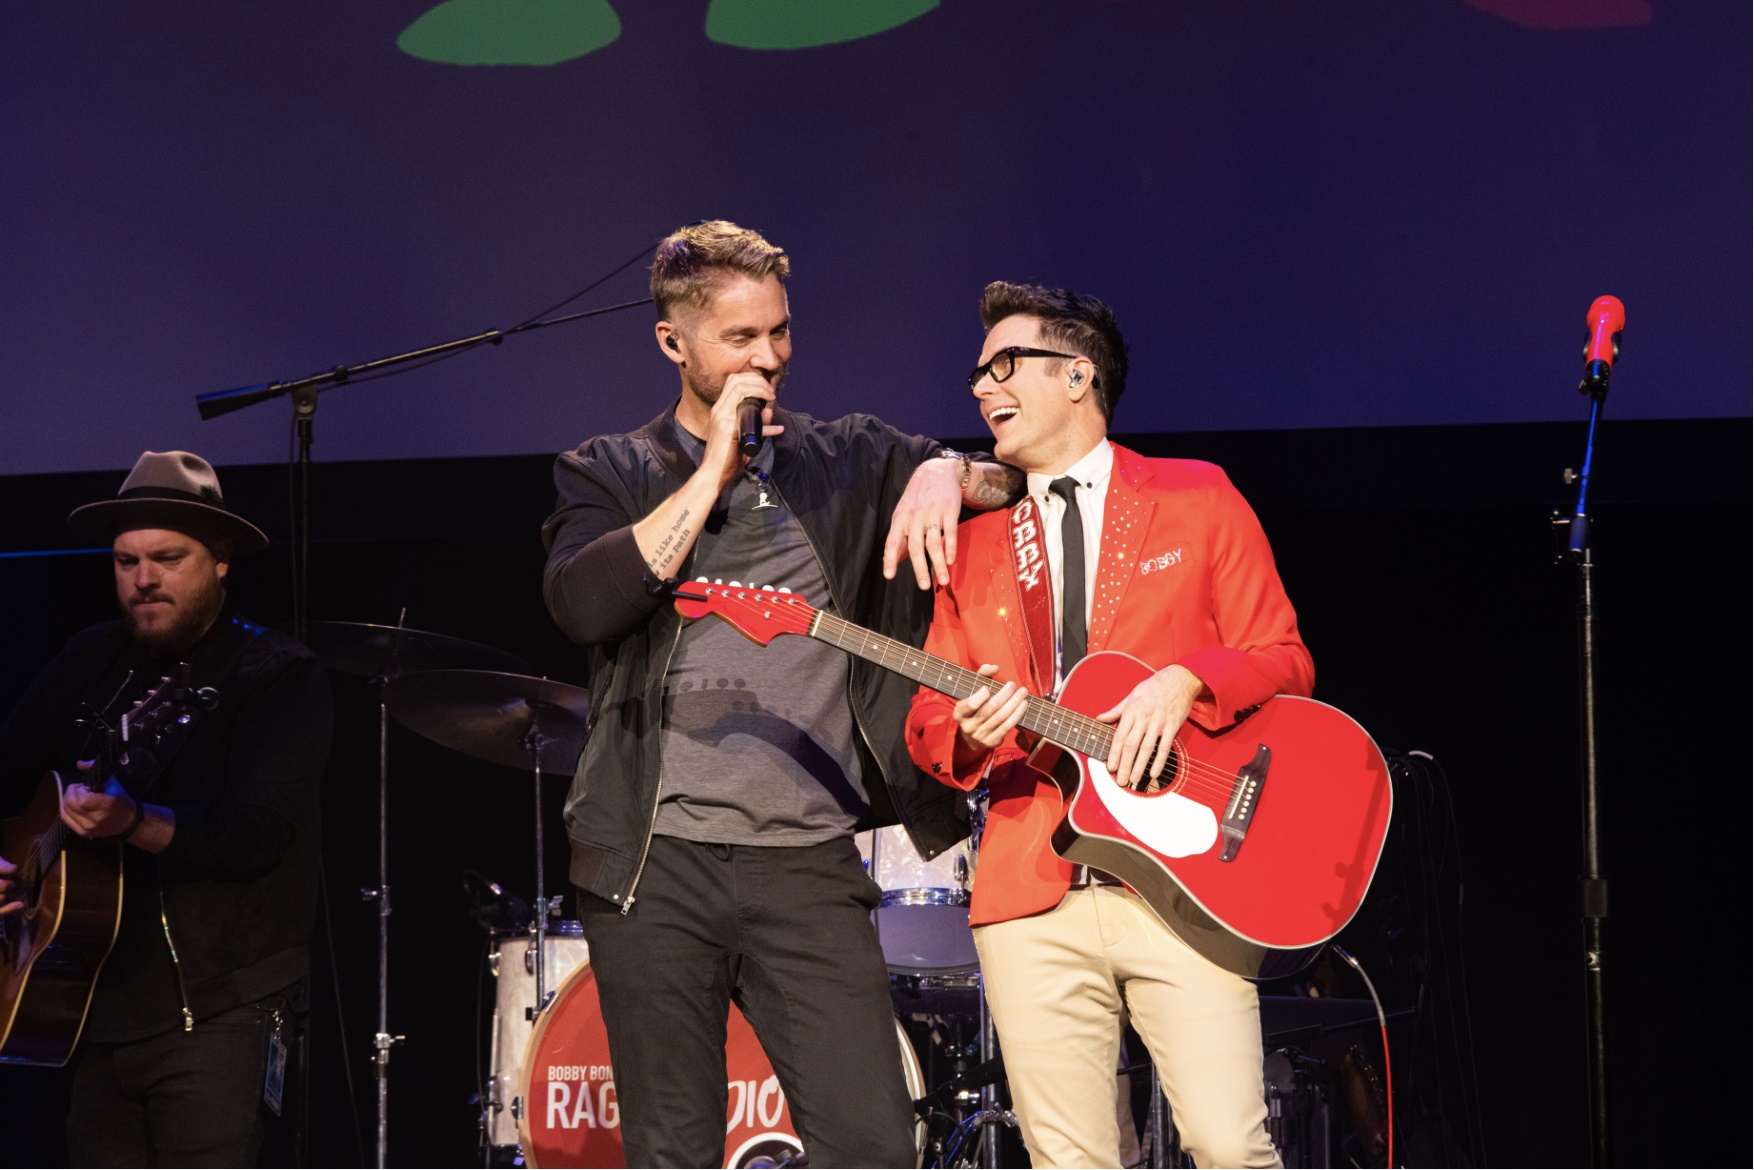 Bobby Bones Delivers on His Million Dollar Show With Special